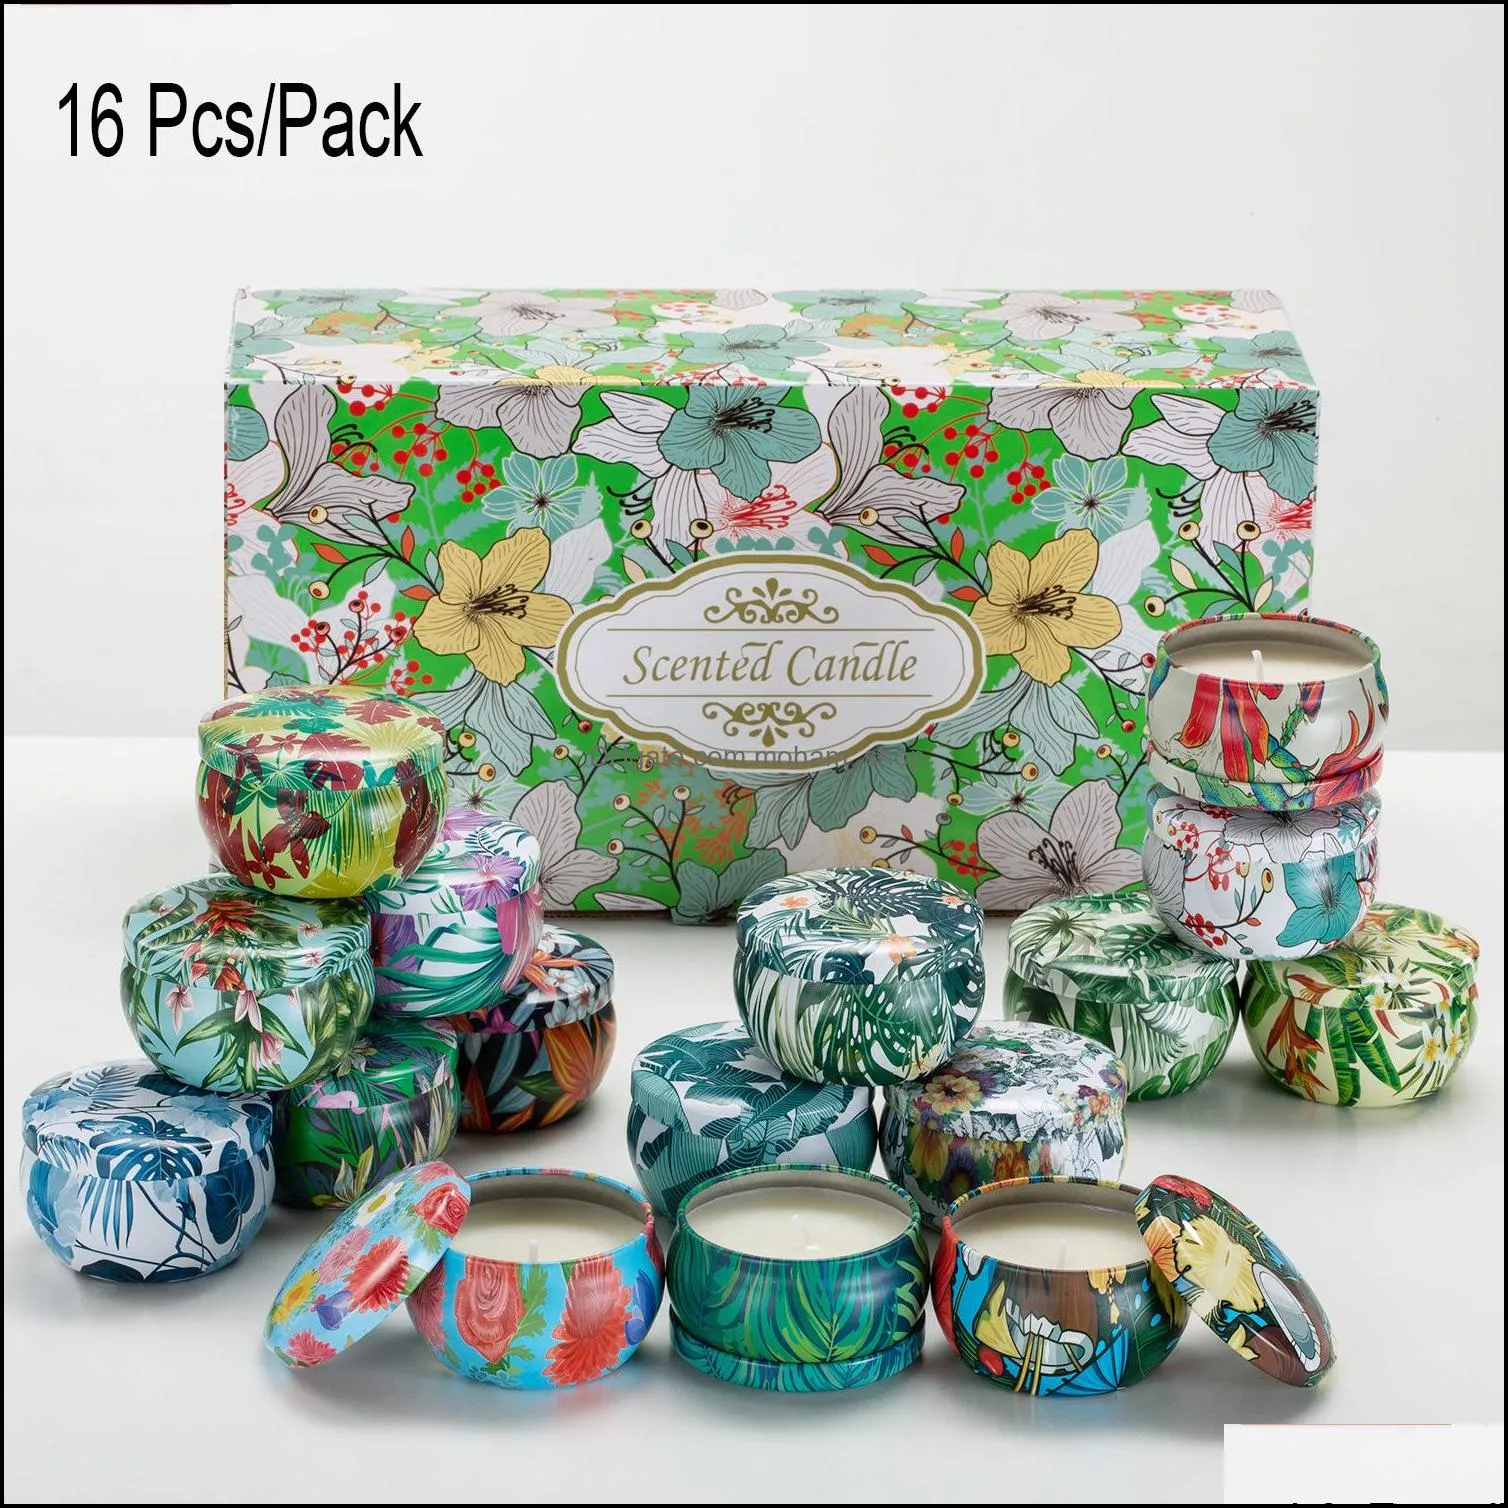 16pcs/pack scented candles flowers tin can fragrance handmade essential oil candle natural soy wax home decoration gifts box th0030